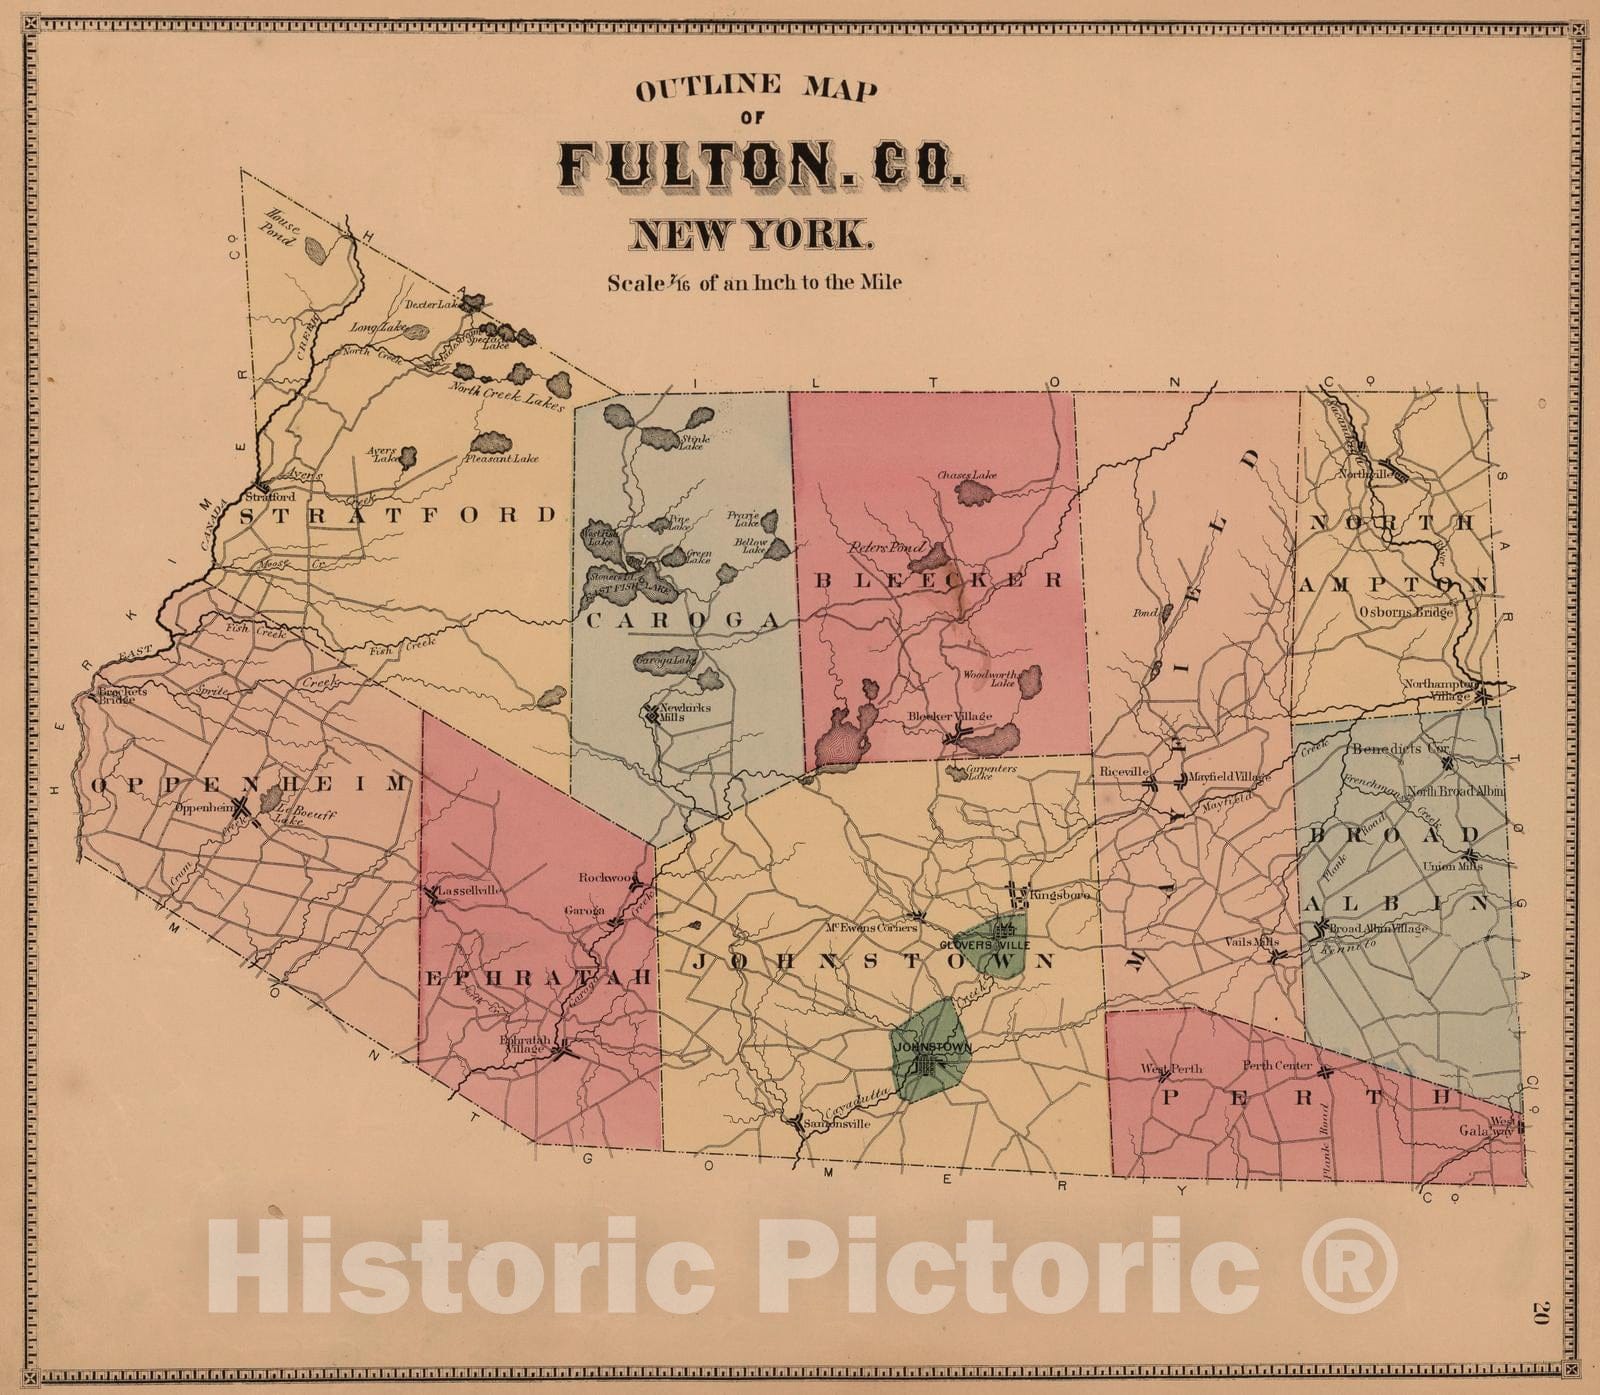 Historic Map : 1868 Outline Map of Fulton County, New York. - Vintage Wall Art